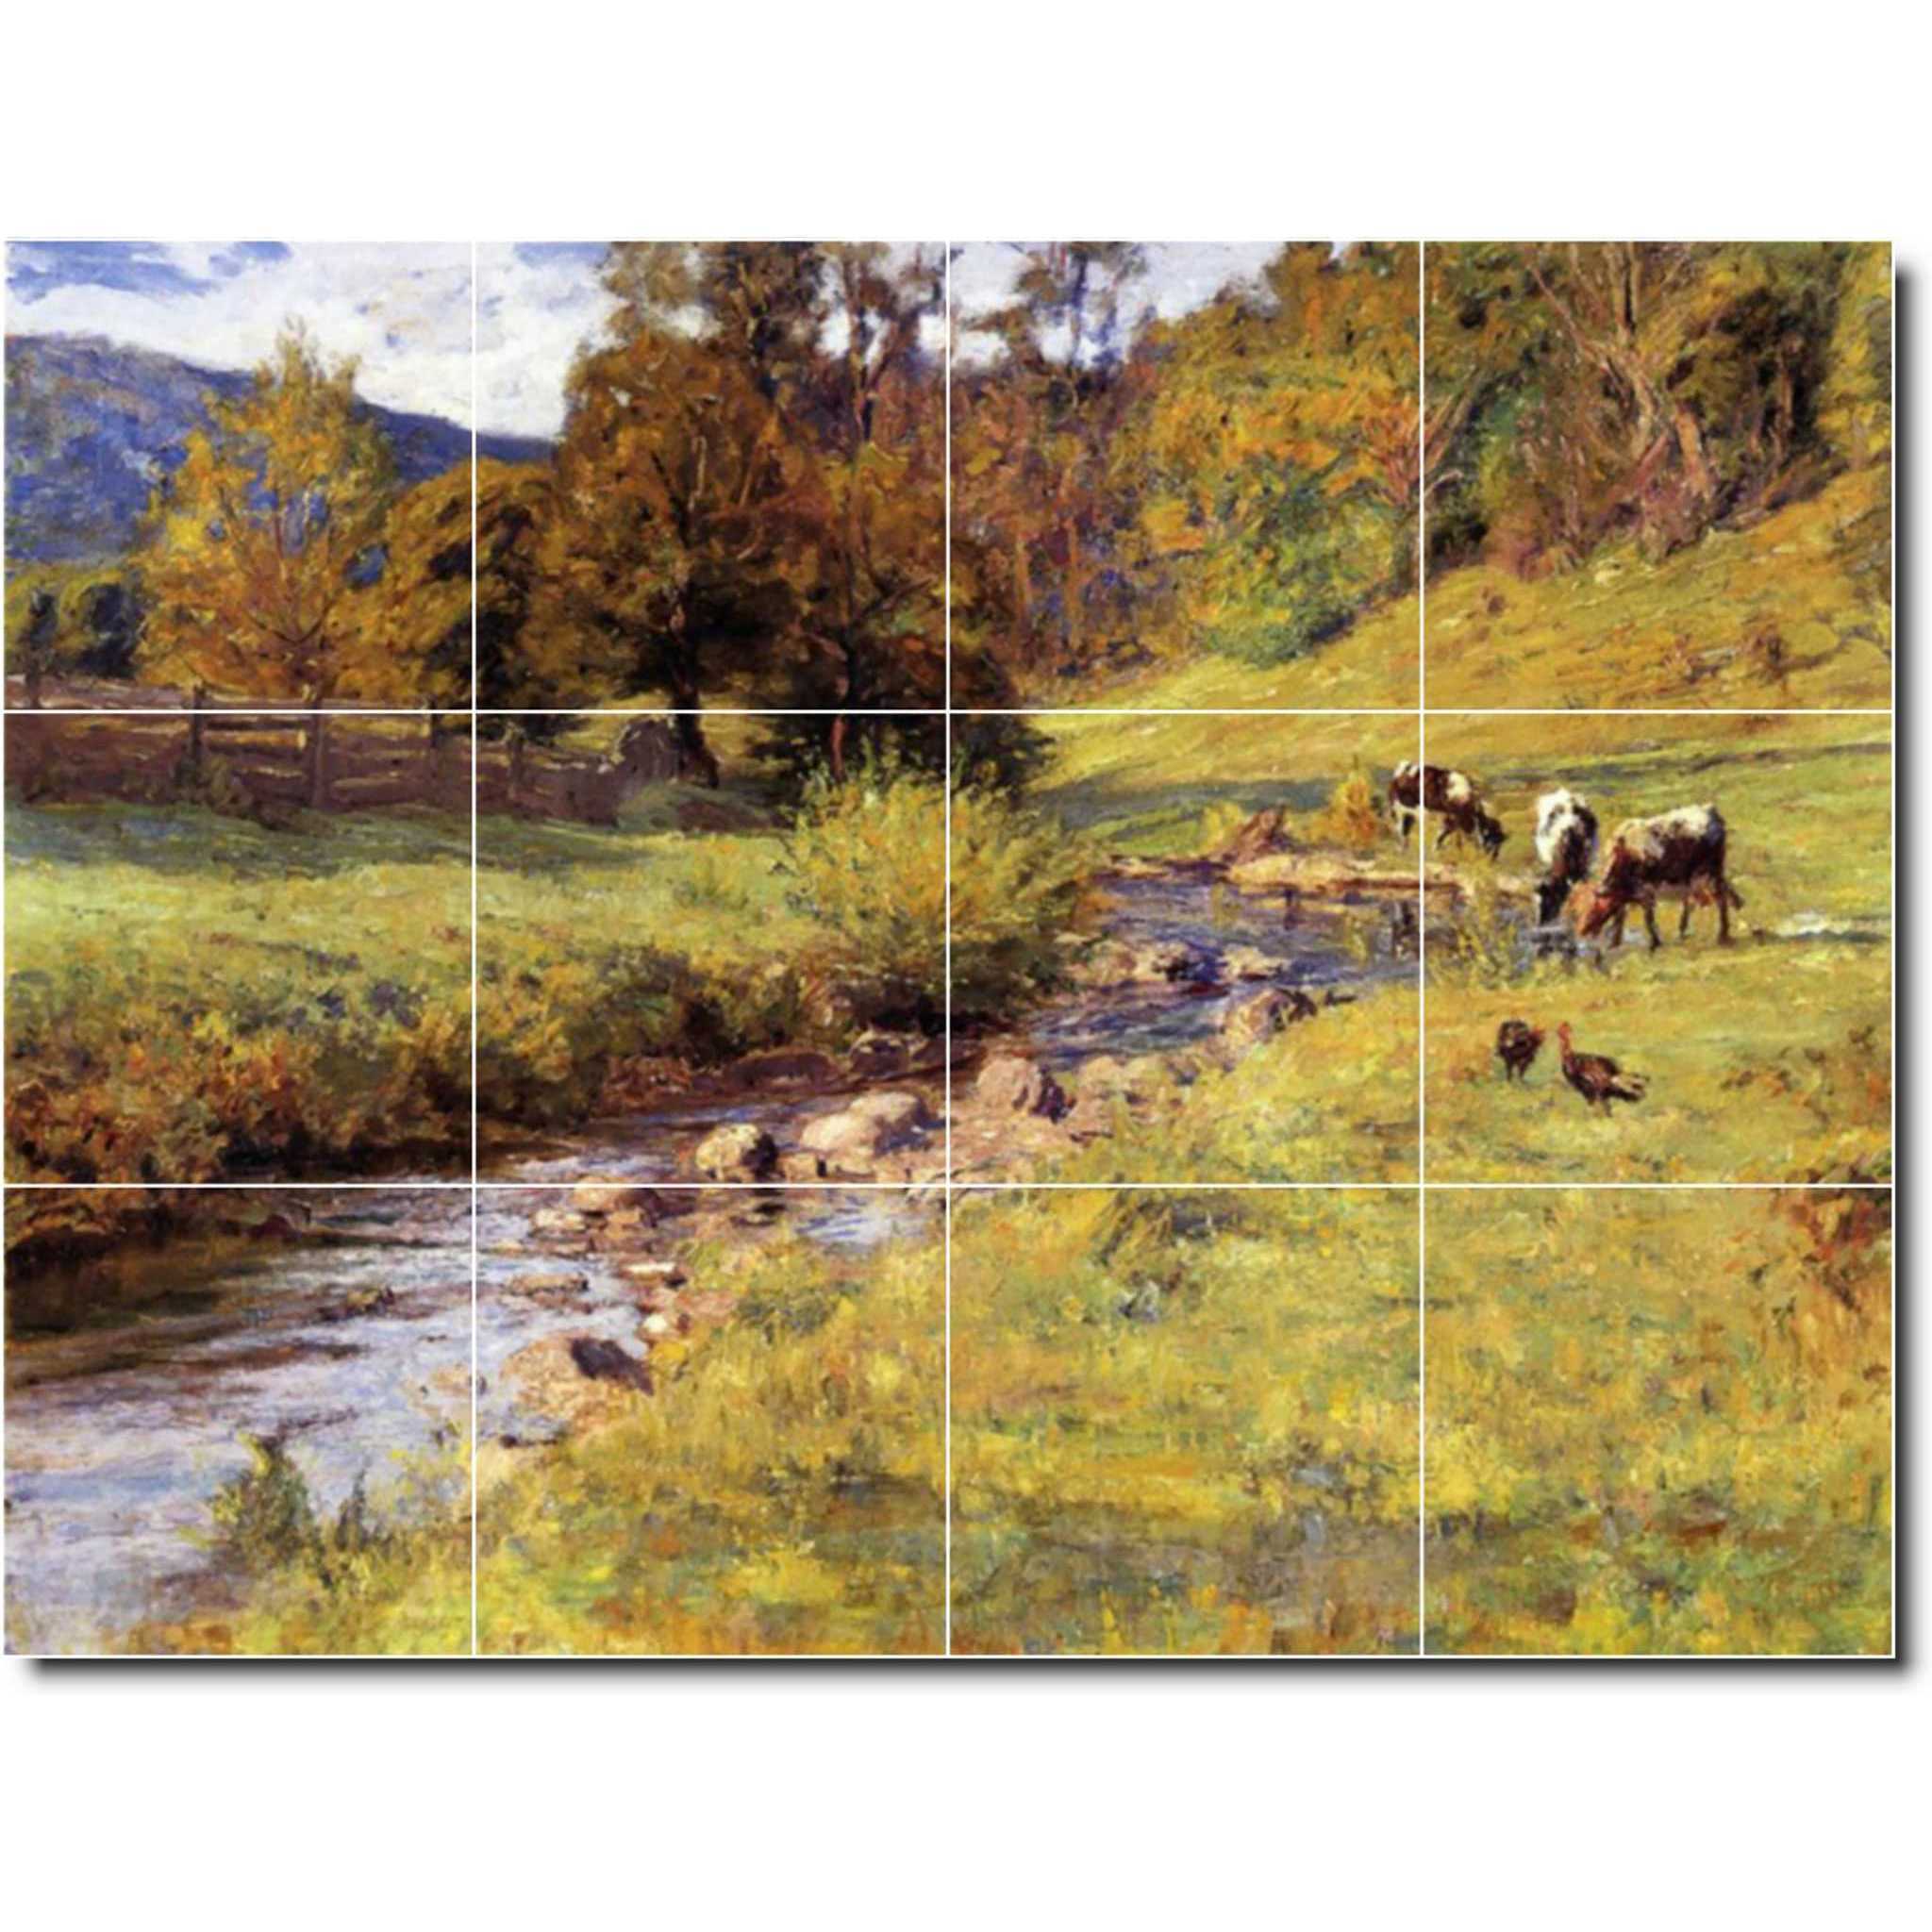 theodore steele country painting ceramic tile mural p08405